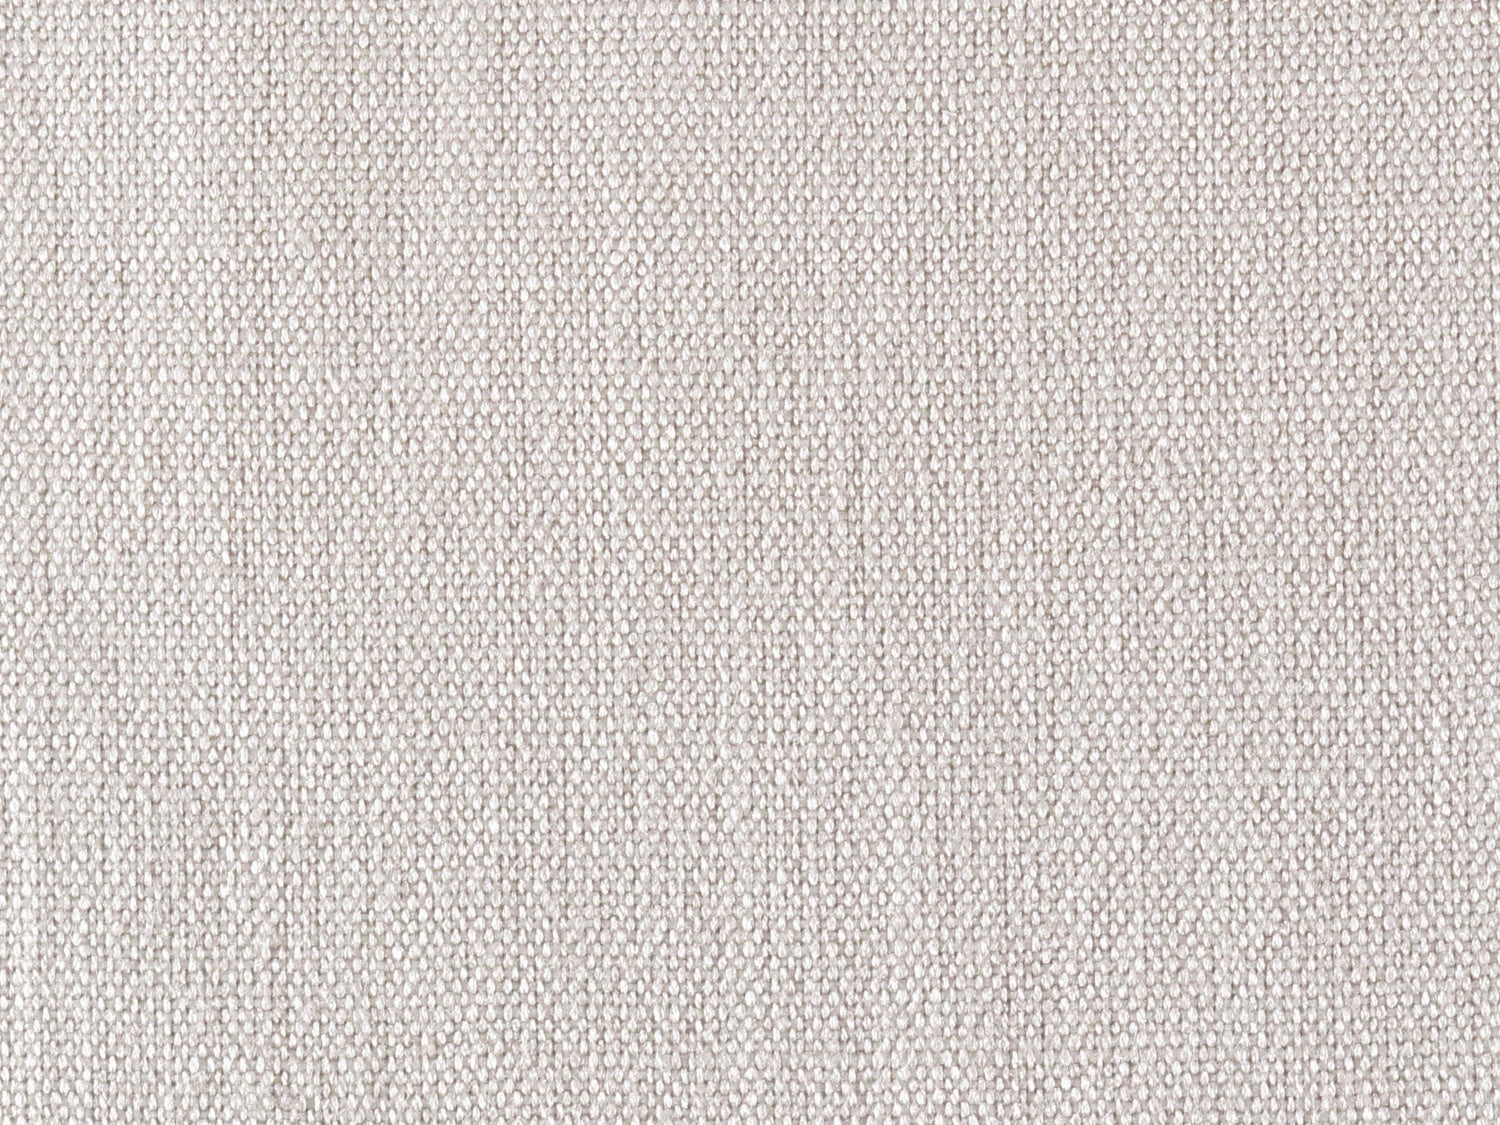 Lakeside Linen fabric in silver color - pattern number PK 0013LAKE - by Scalamandre in the Old World Weavers collection